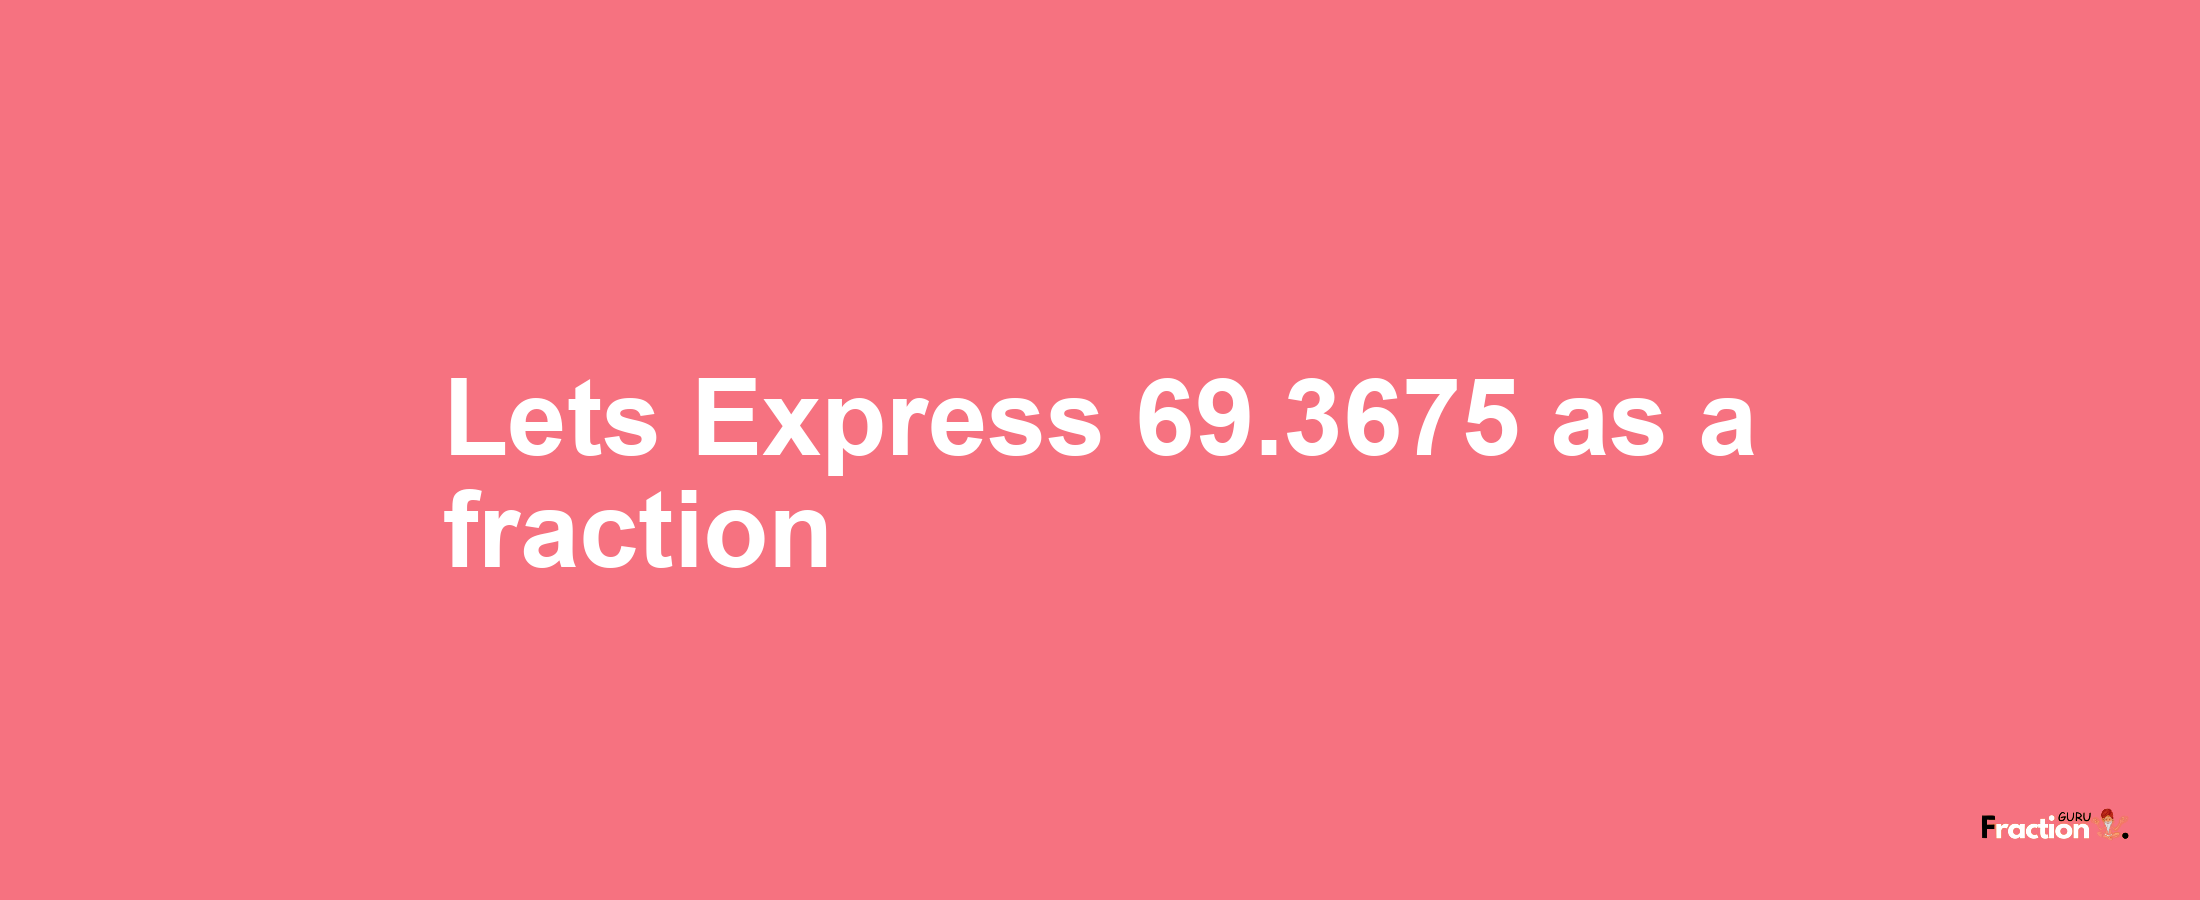 Lets Express 69.3675 as afraction